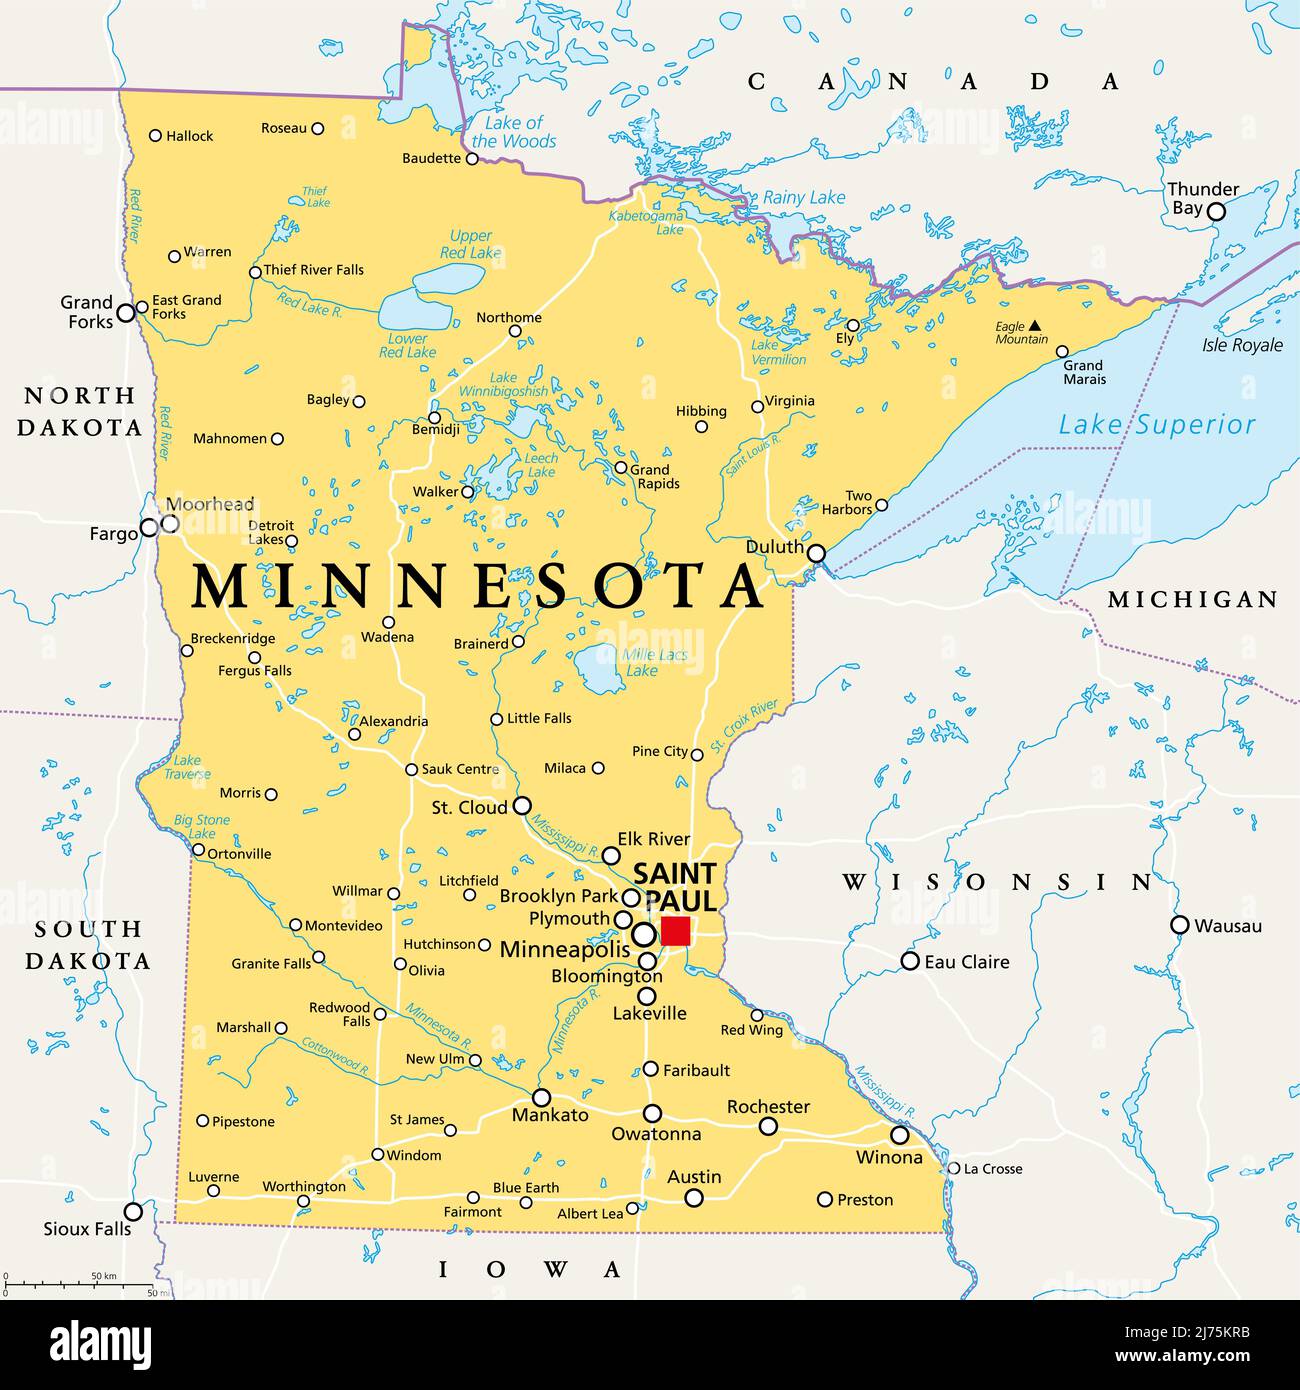 Minnesota, MN, political map, with capital Saint Paul and metropolitan area Minneapolis. State in the upper Midwestern United States. Stock Photo